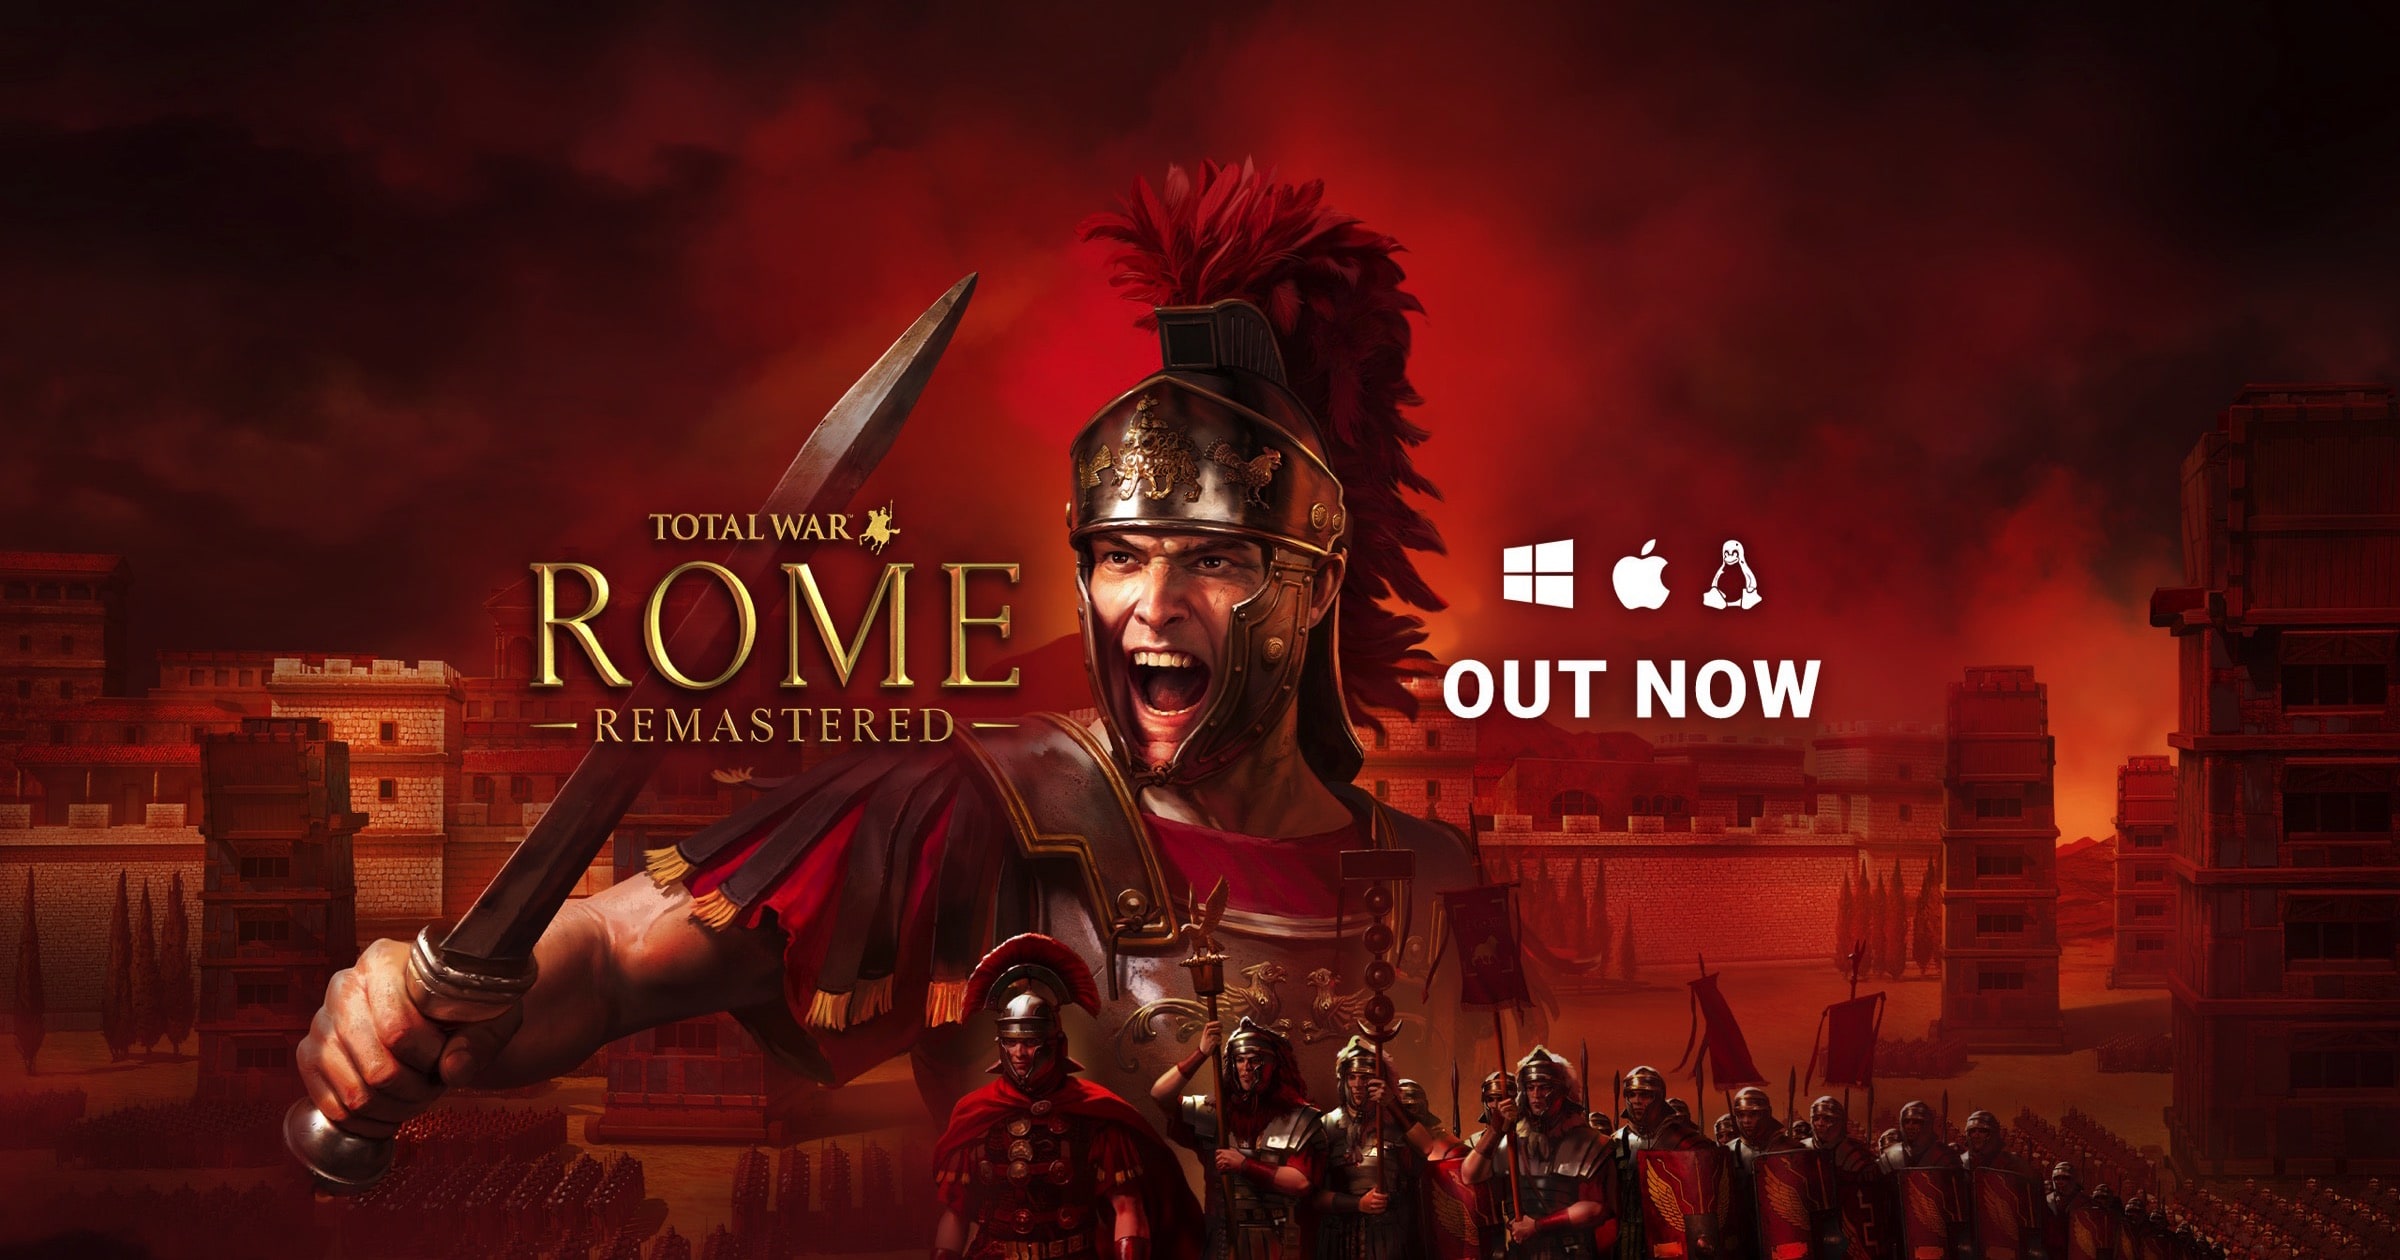 ‘Total War: ROME REMASTERED’ Releases Patch 2.0.4 for Gamers